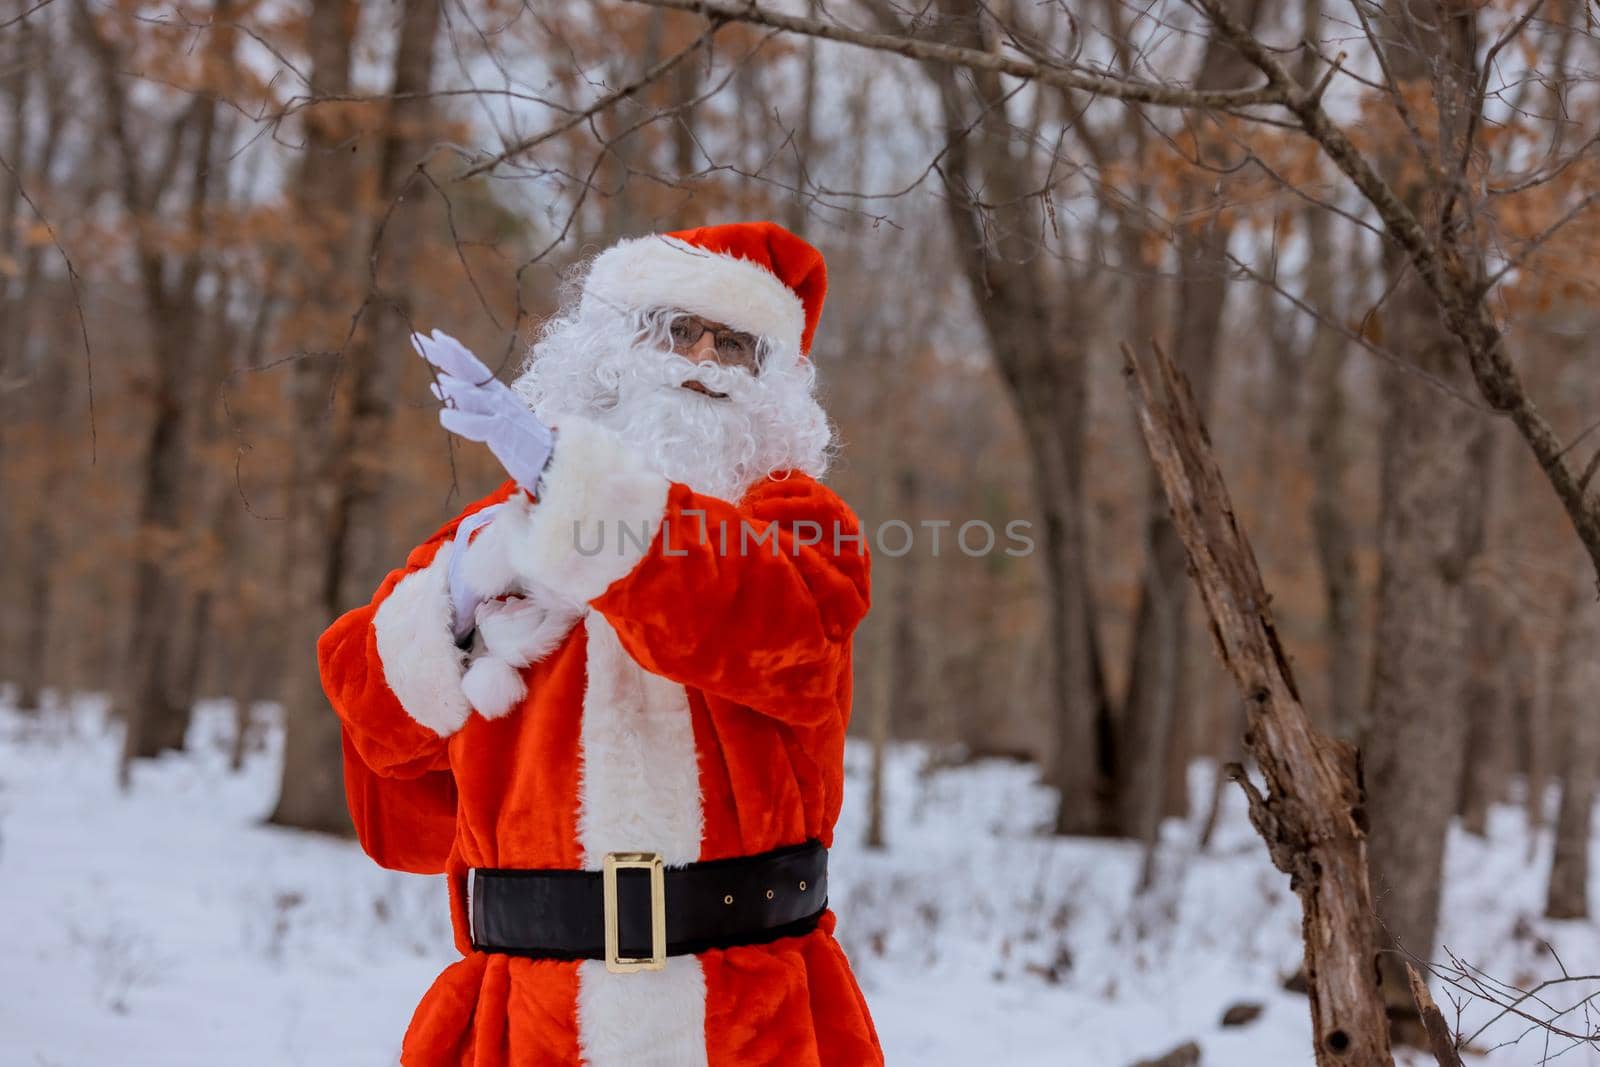 Santa Claus walking a forest tree holding in a red bag gifts for children for Christmas by ungvar